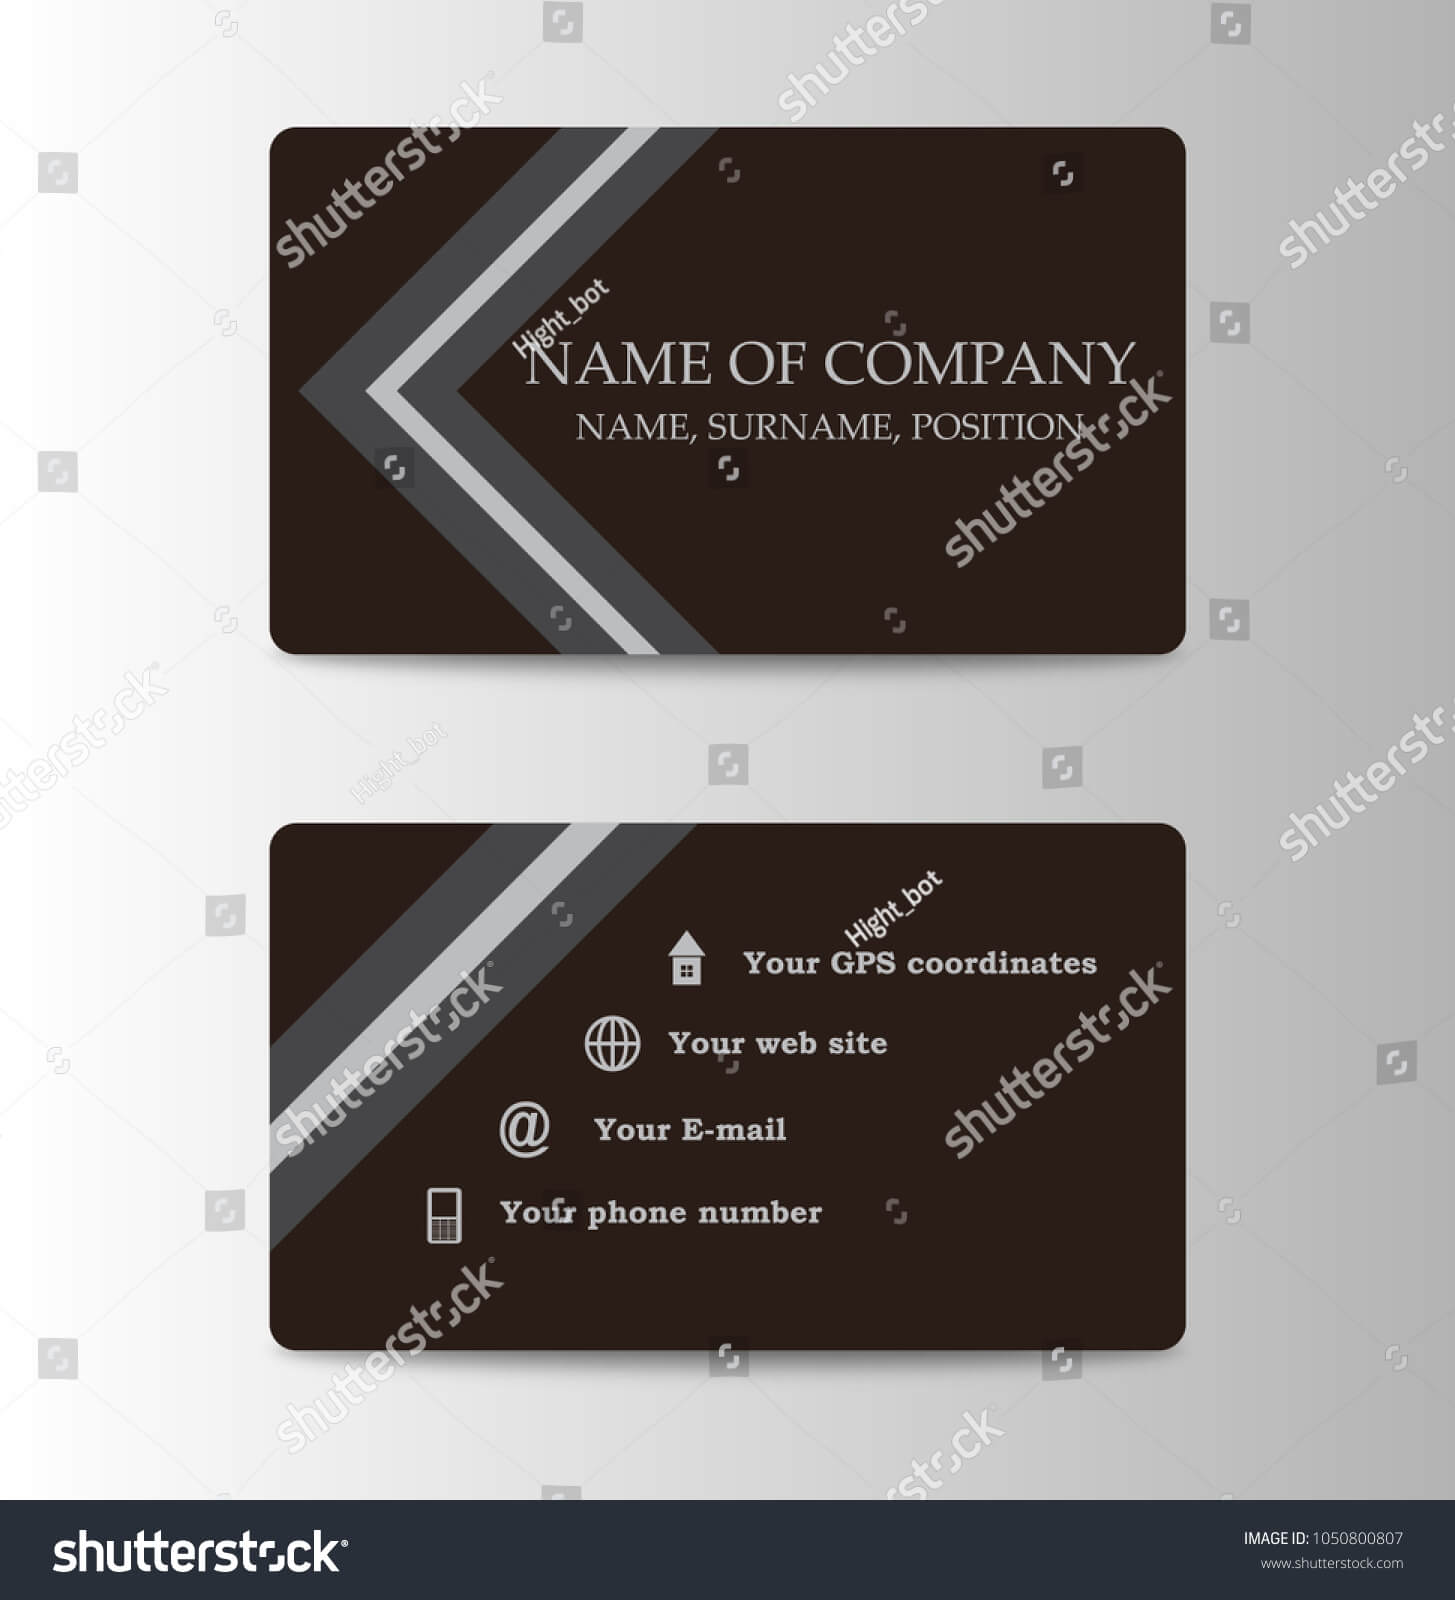 Corporate Id Card Design Template Personal Stock Vector With Personal Identification Card Template